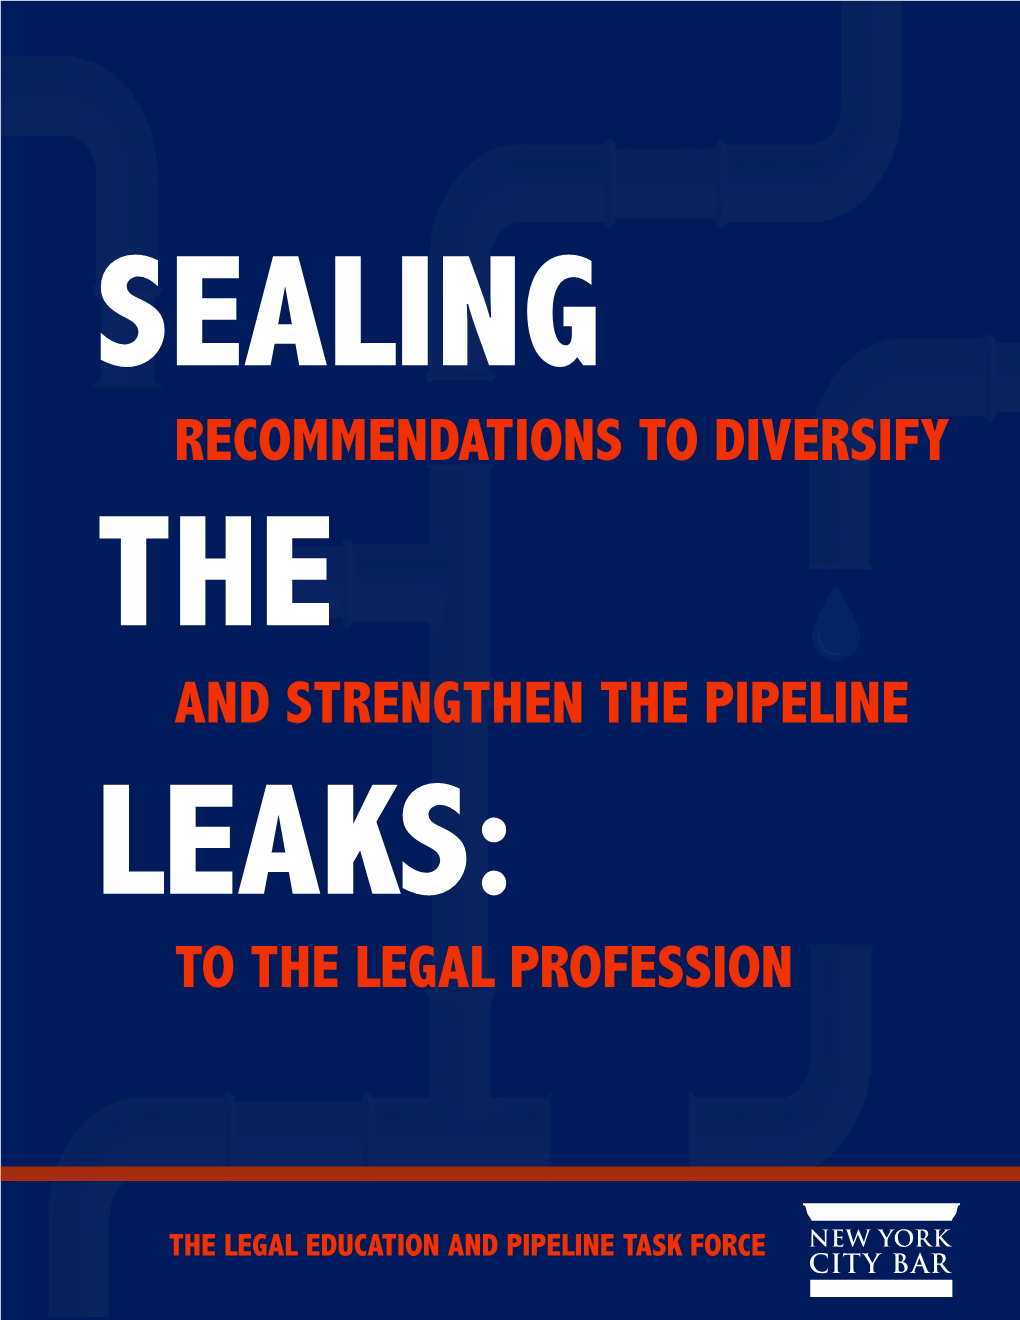 Recommendations to Diversity and Strengthen the Pipeline to the Legal